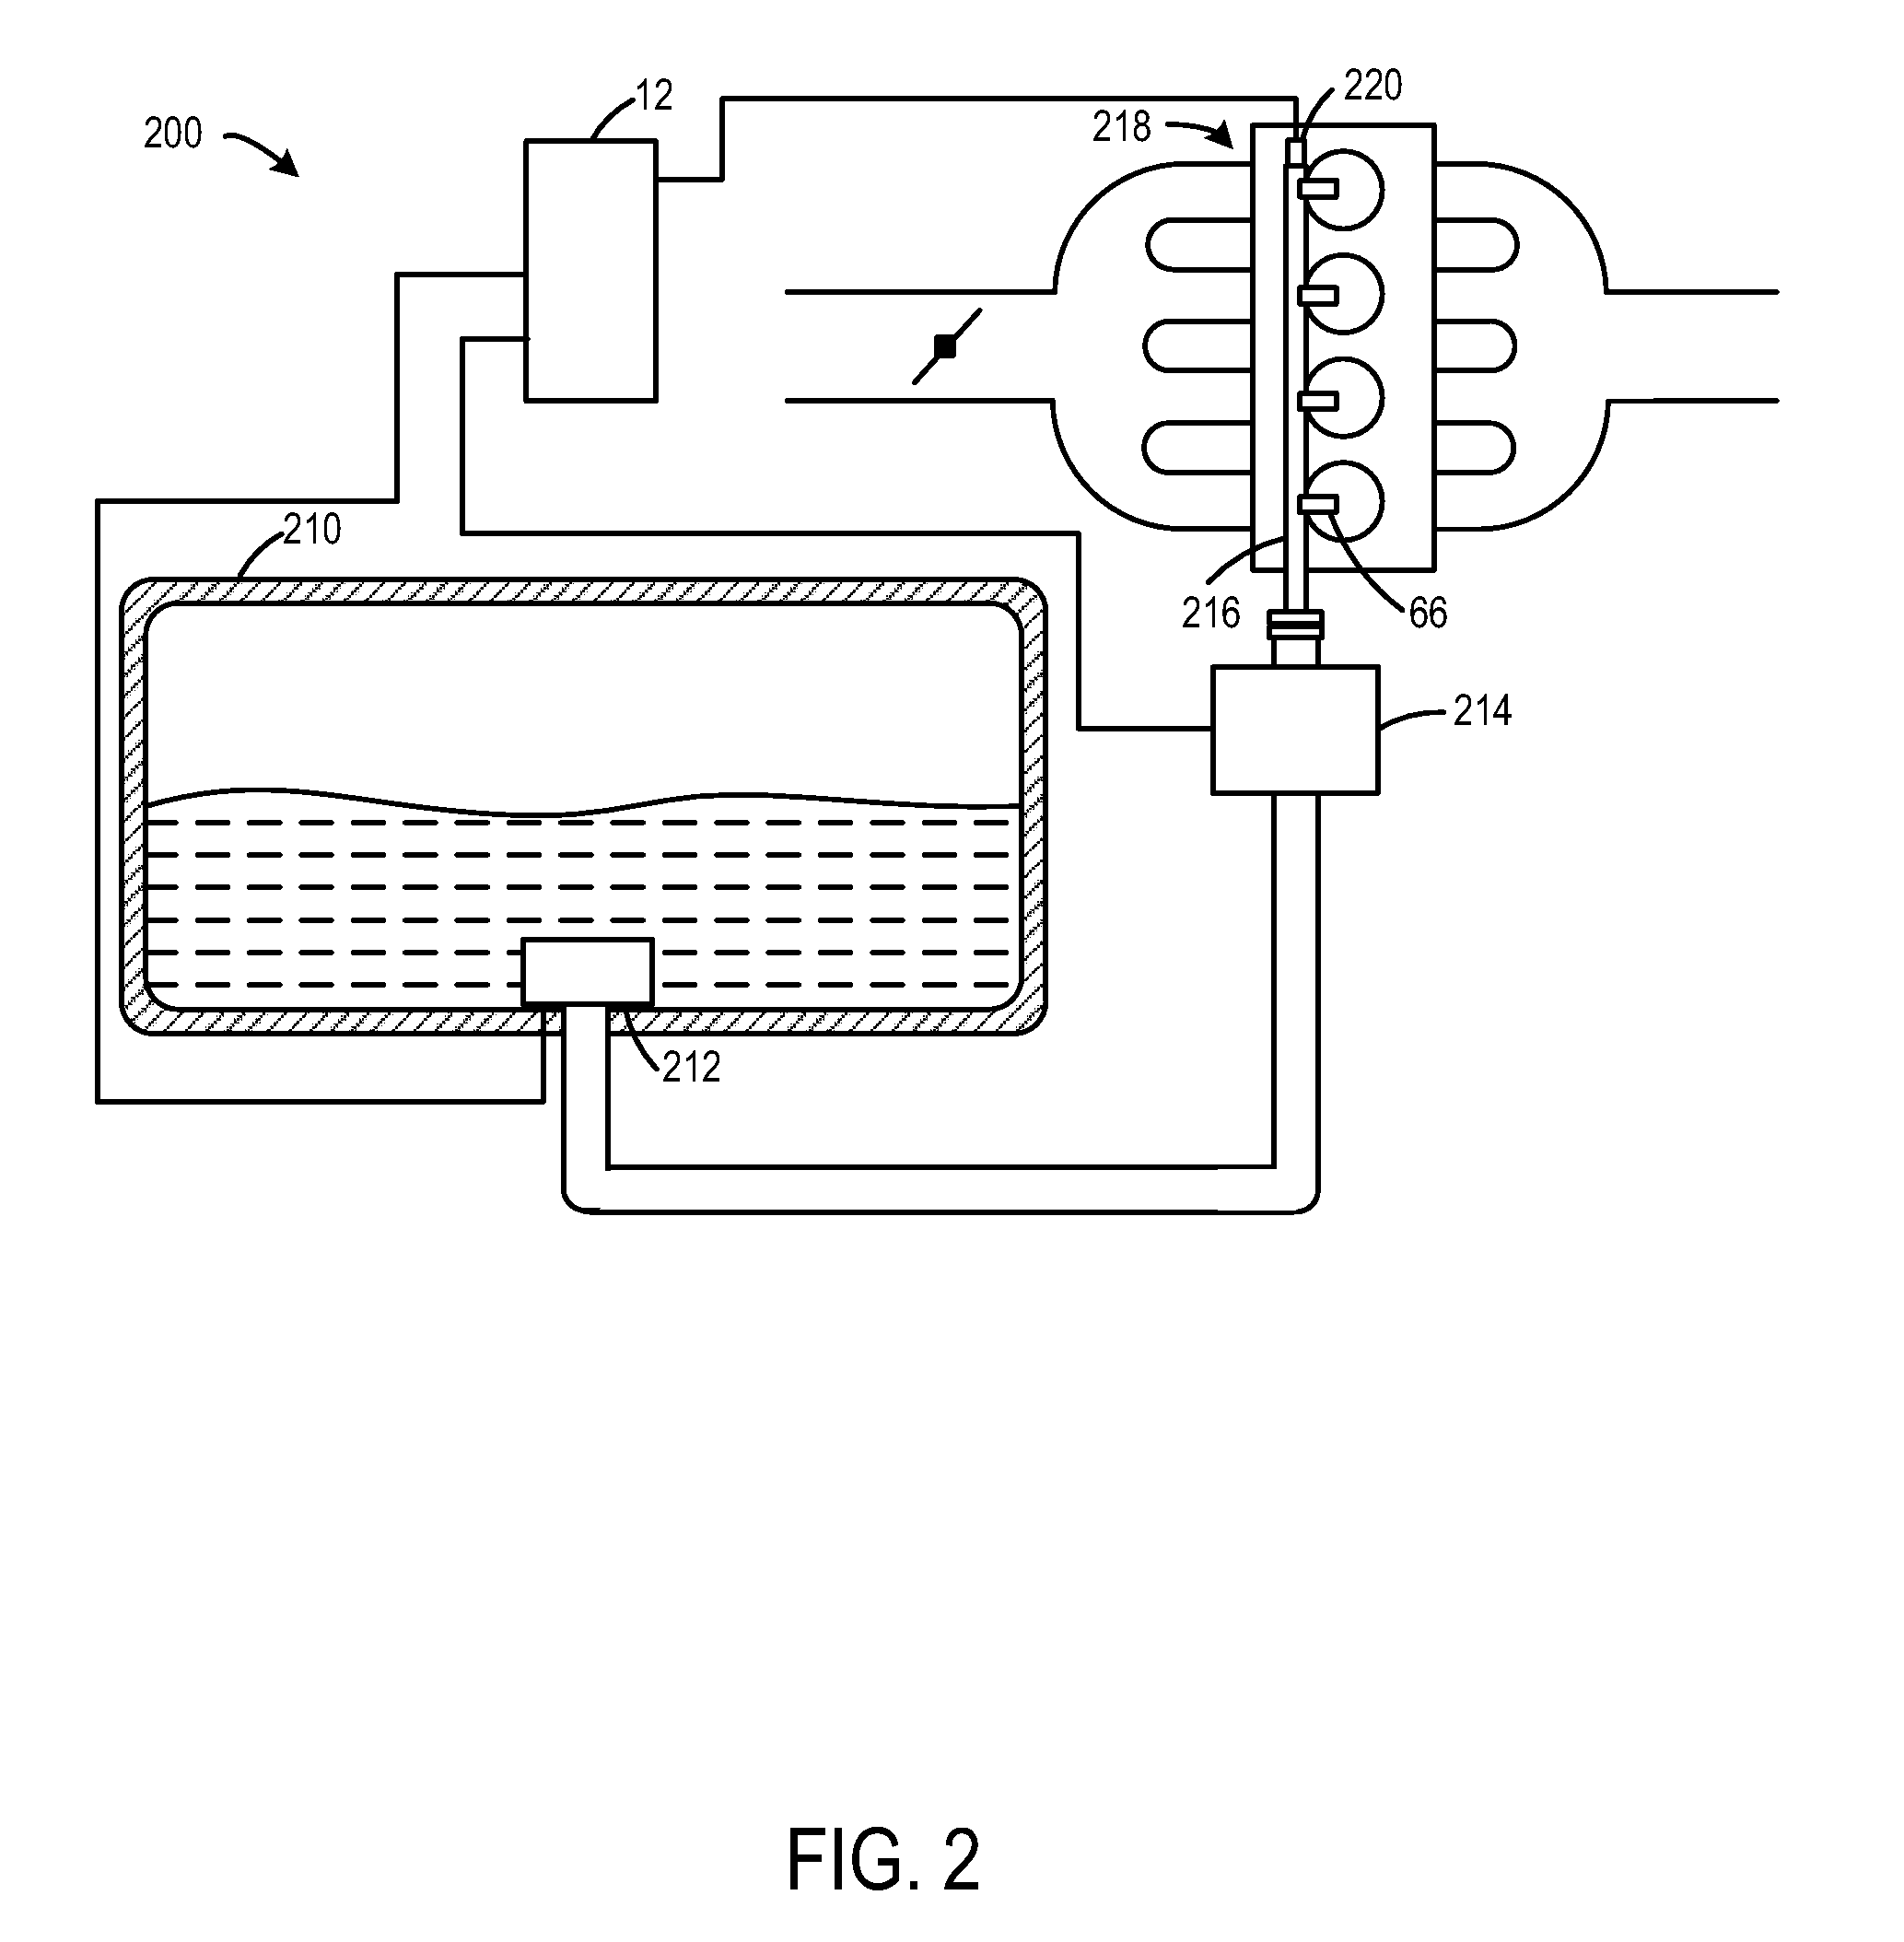 System and Method to Compensate for Variable Fuel Injector Characterization in a Direct Injection System